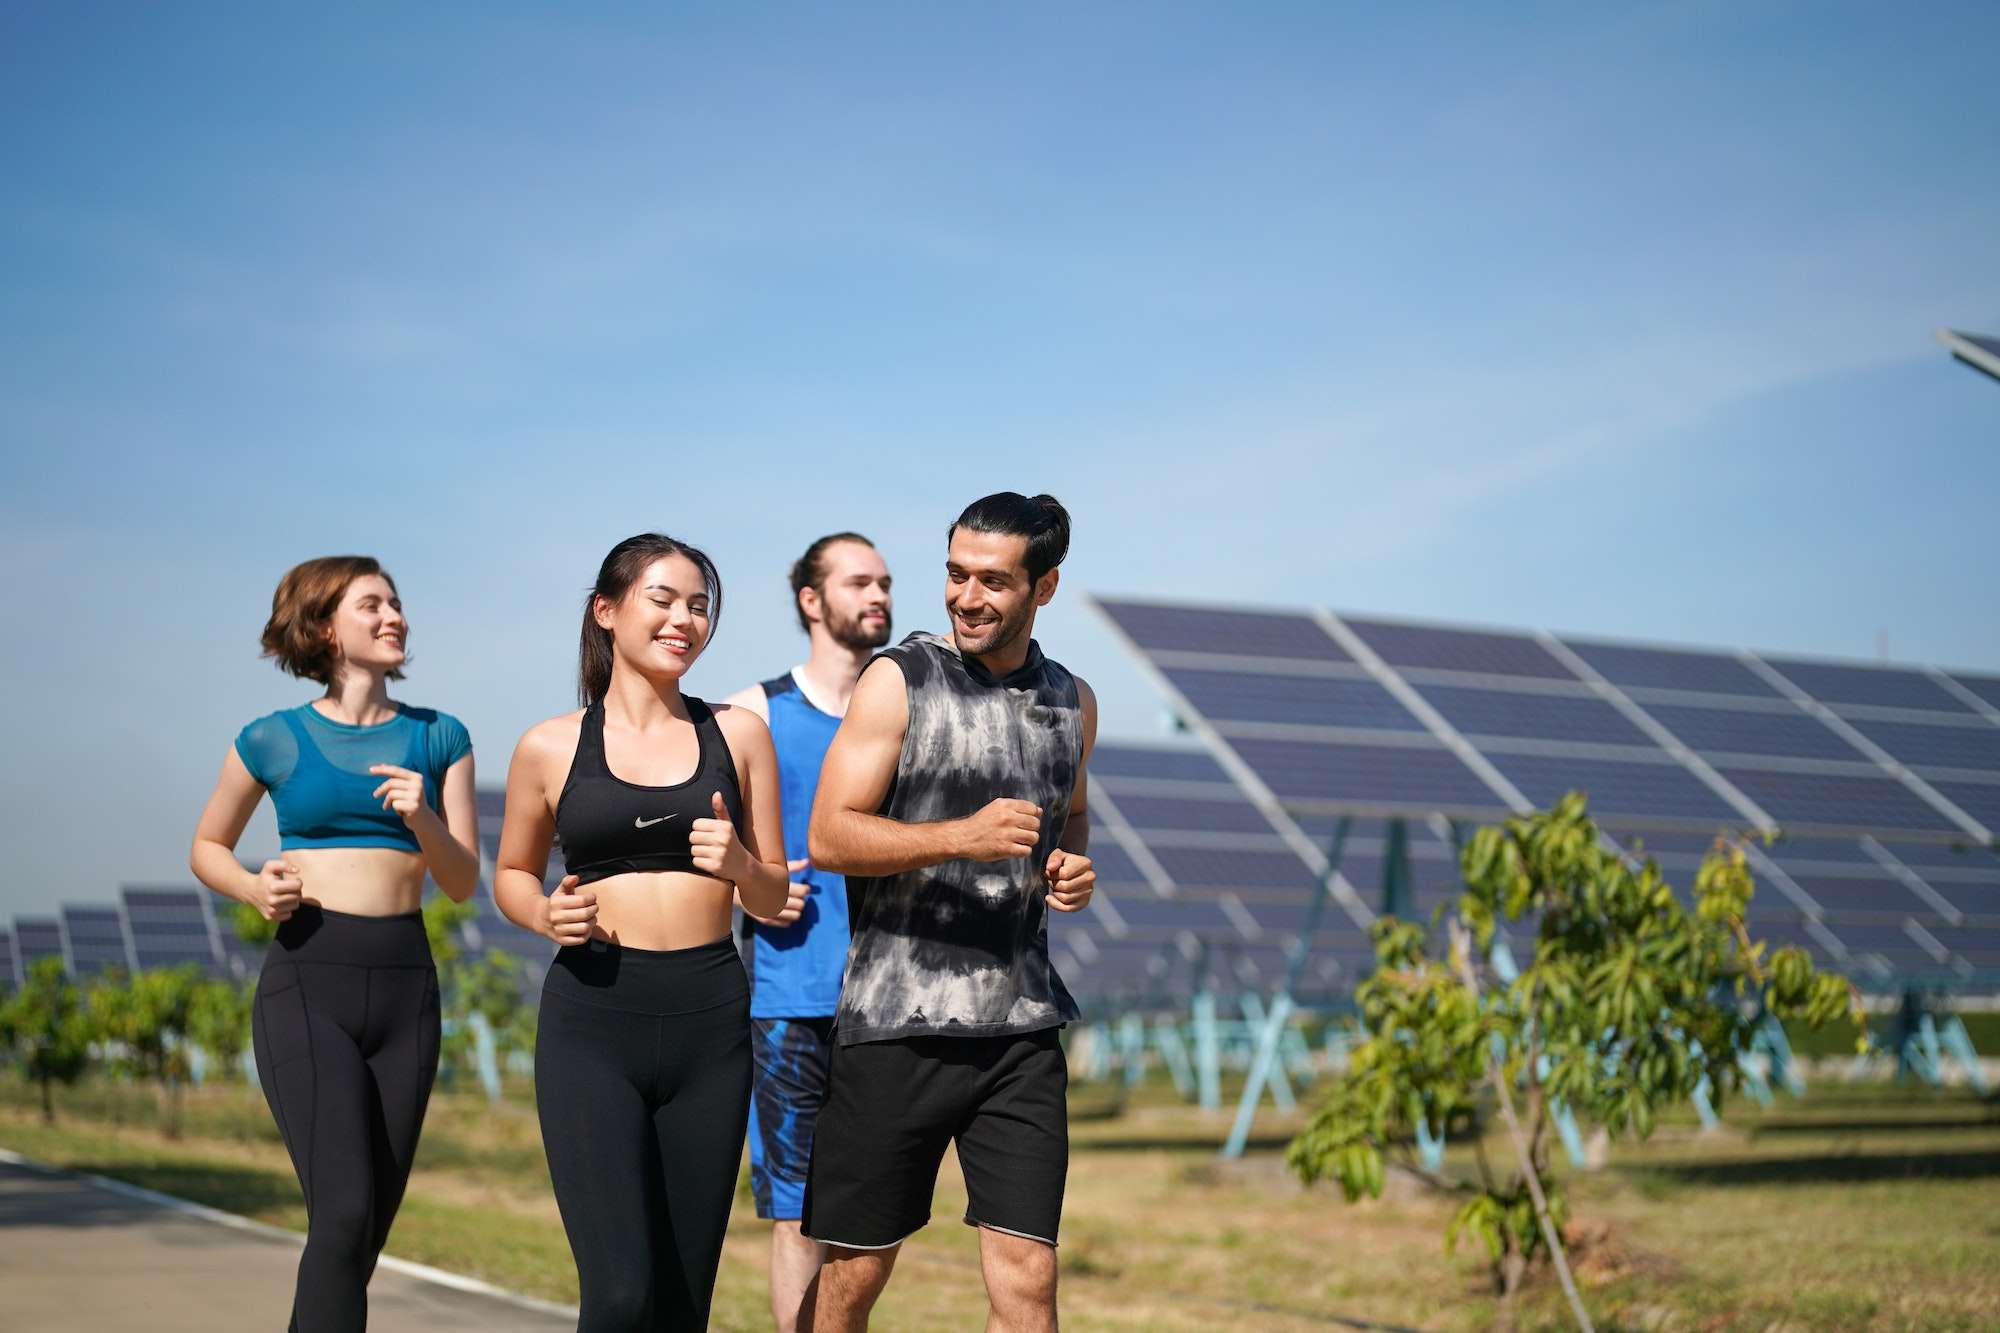 Solar Panels Farm Runner Active Man Athlete Jogging By Outdoor Background Header Panoramic